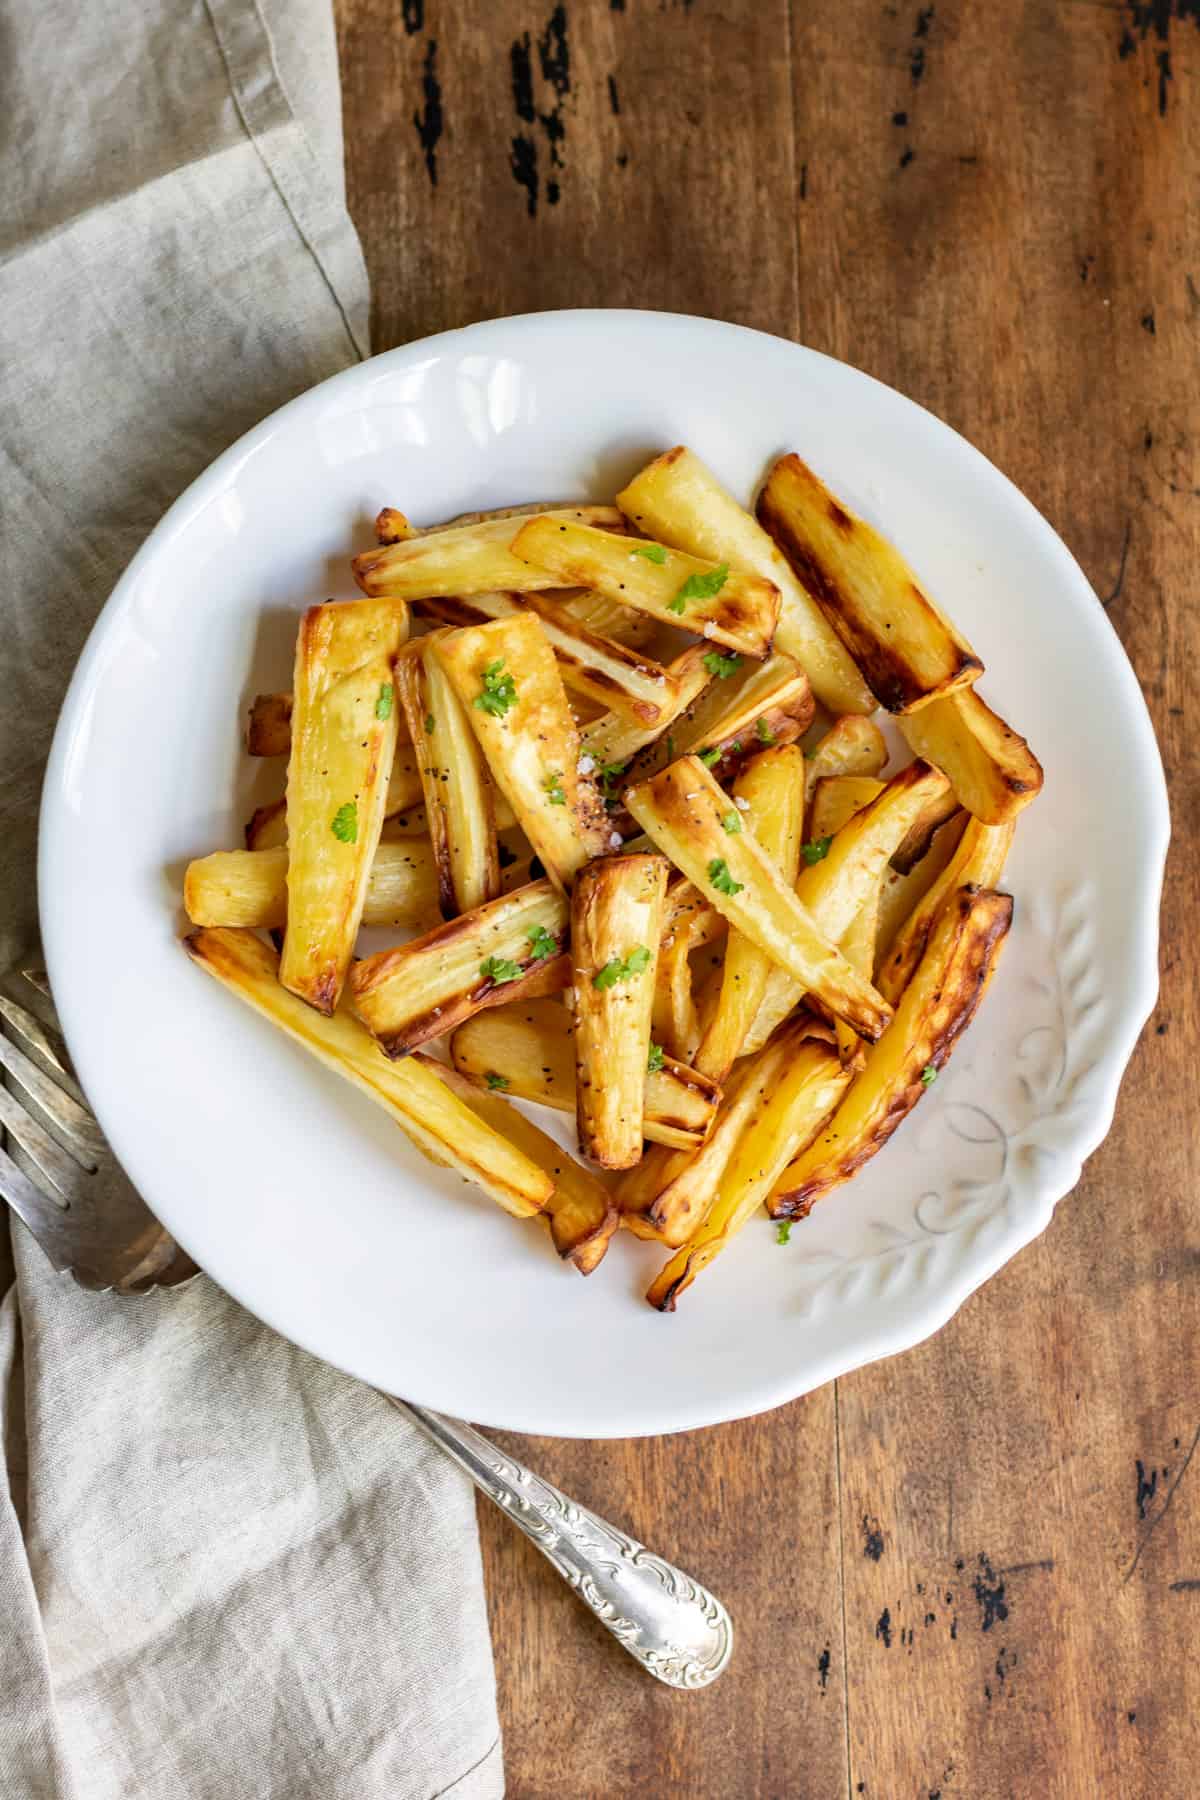 A wooden table with a plate of air fryer roasted parsnips.